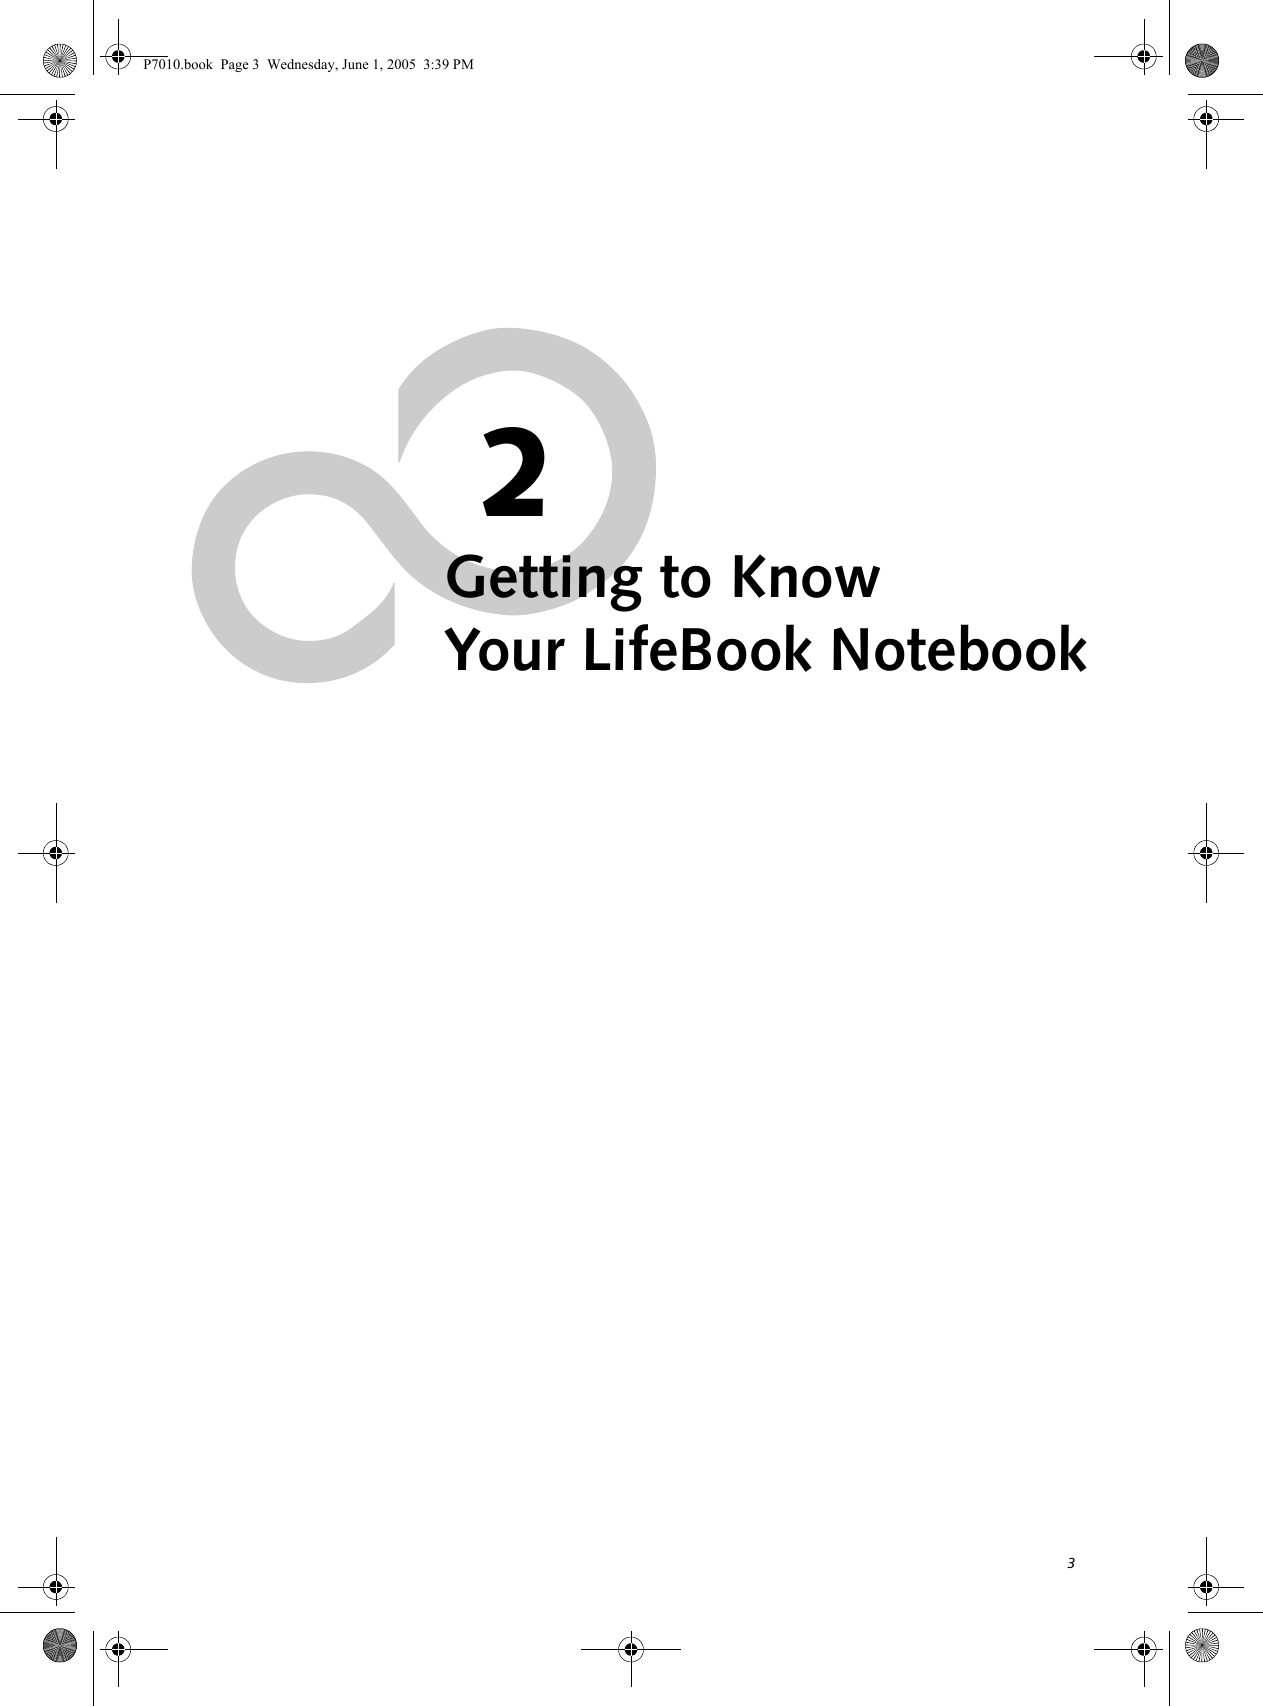 32Getting to KnowYour LifeBook NotebookP7010.book  Page 3  Wednesday, June 1, 2005  3:39 PM